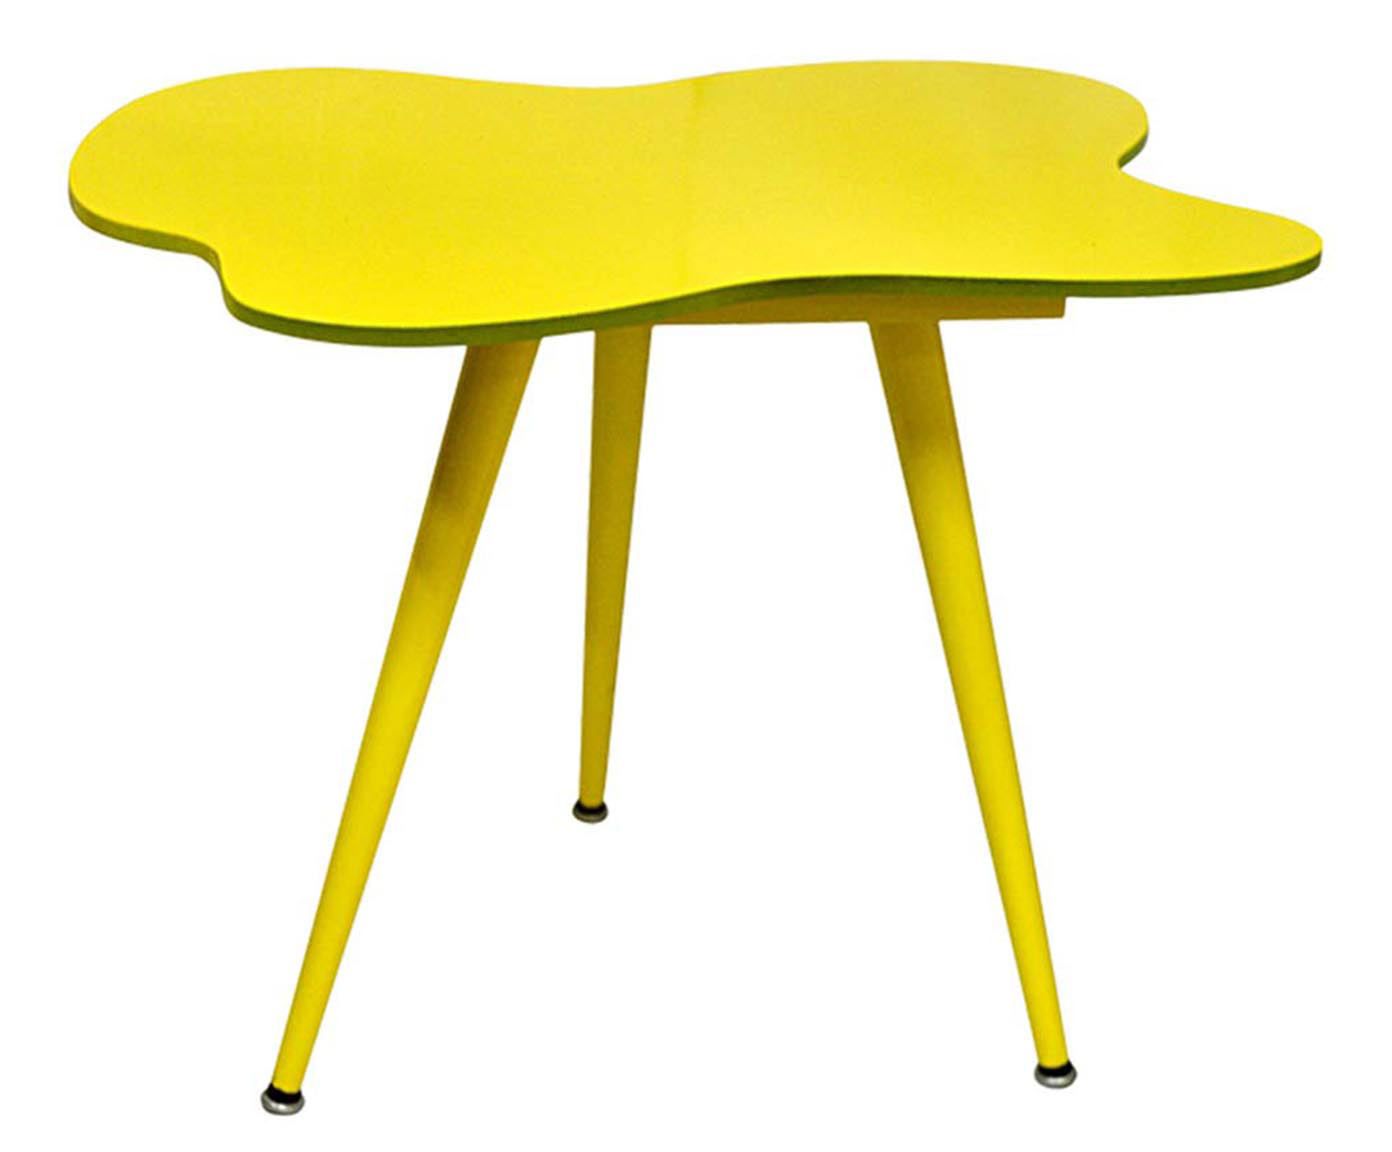 Mesa lateral ameb soleil - 55x65cm | Westwing.com.br